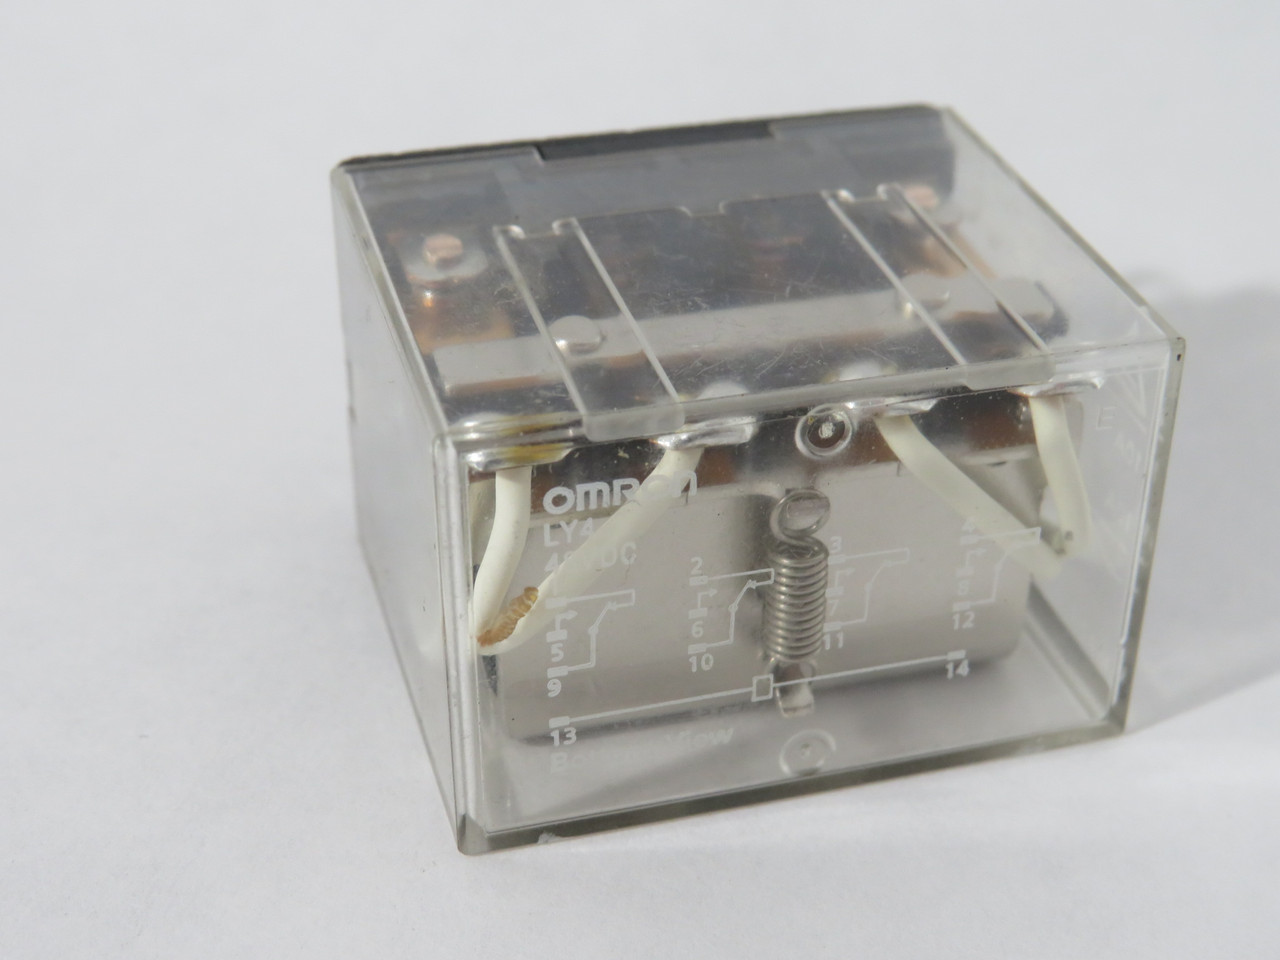 Omron LY4-DC48 General Relay 48VDC 10A@110/240VAC 28VDC 14-Blade USED